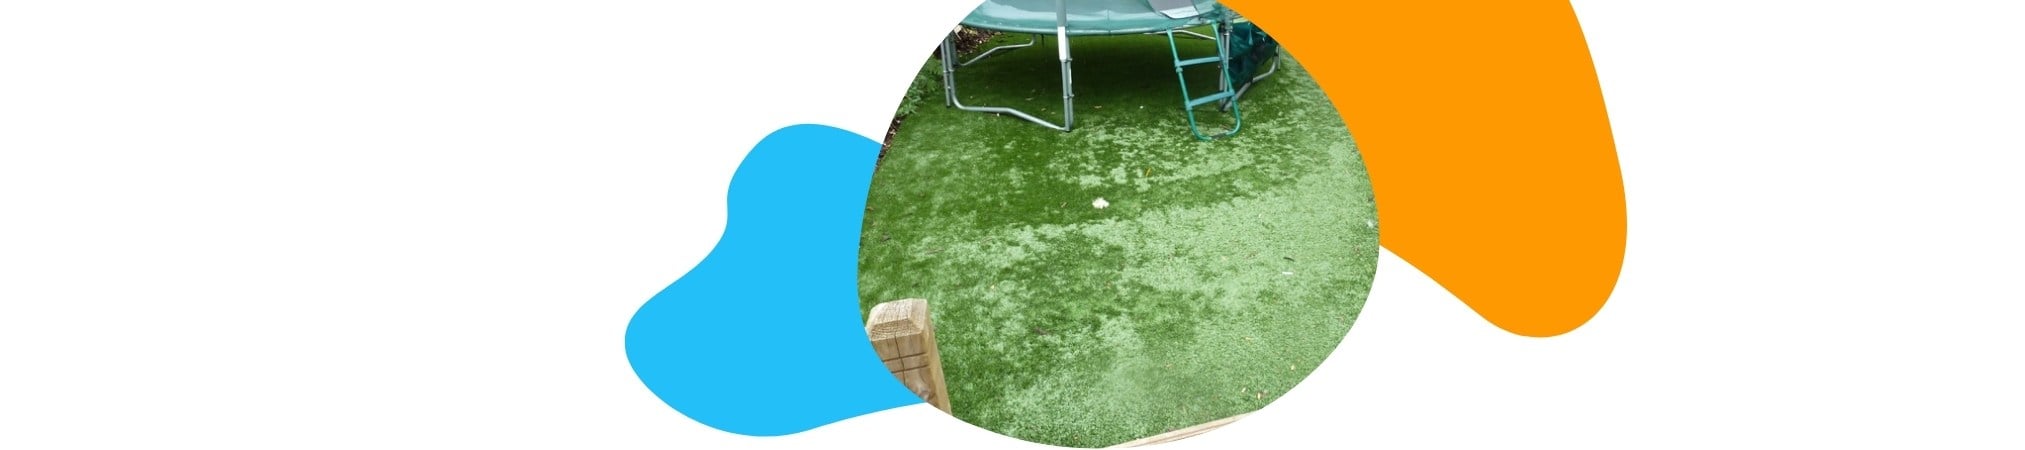 Artificial Grass Matting: Is This Preventable?